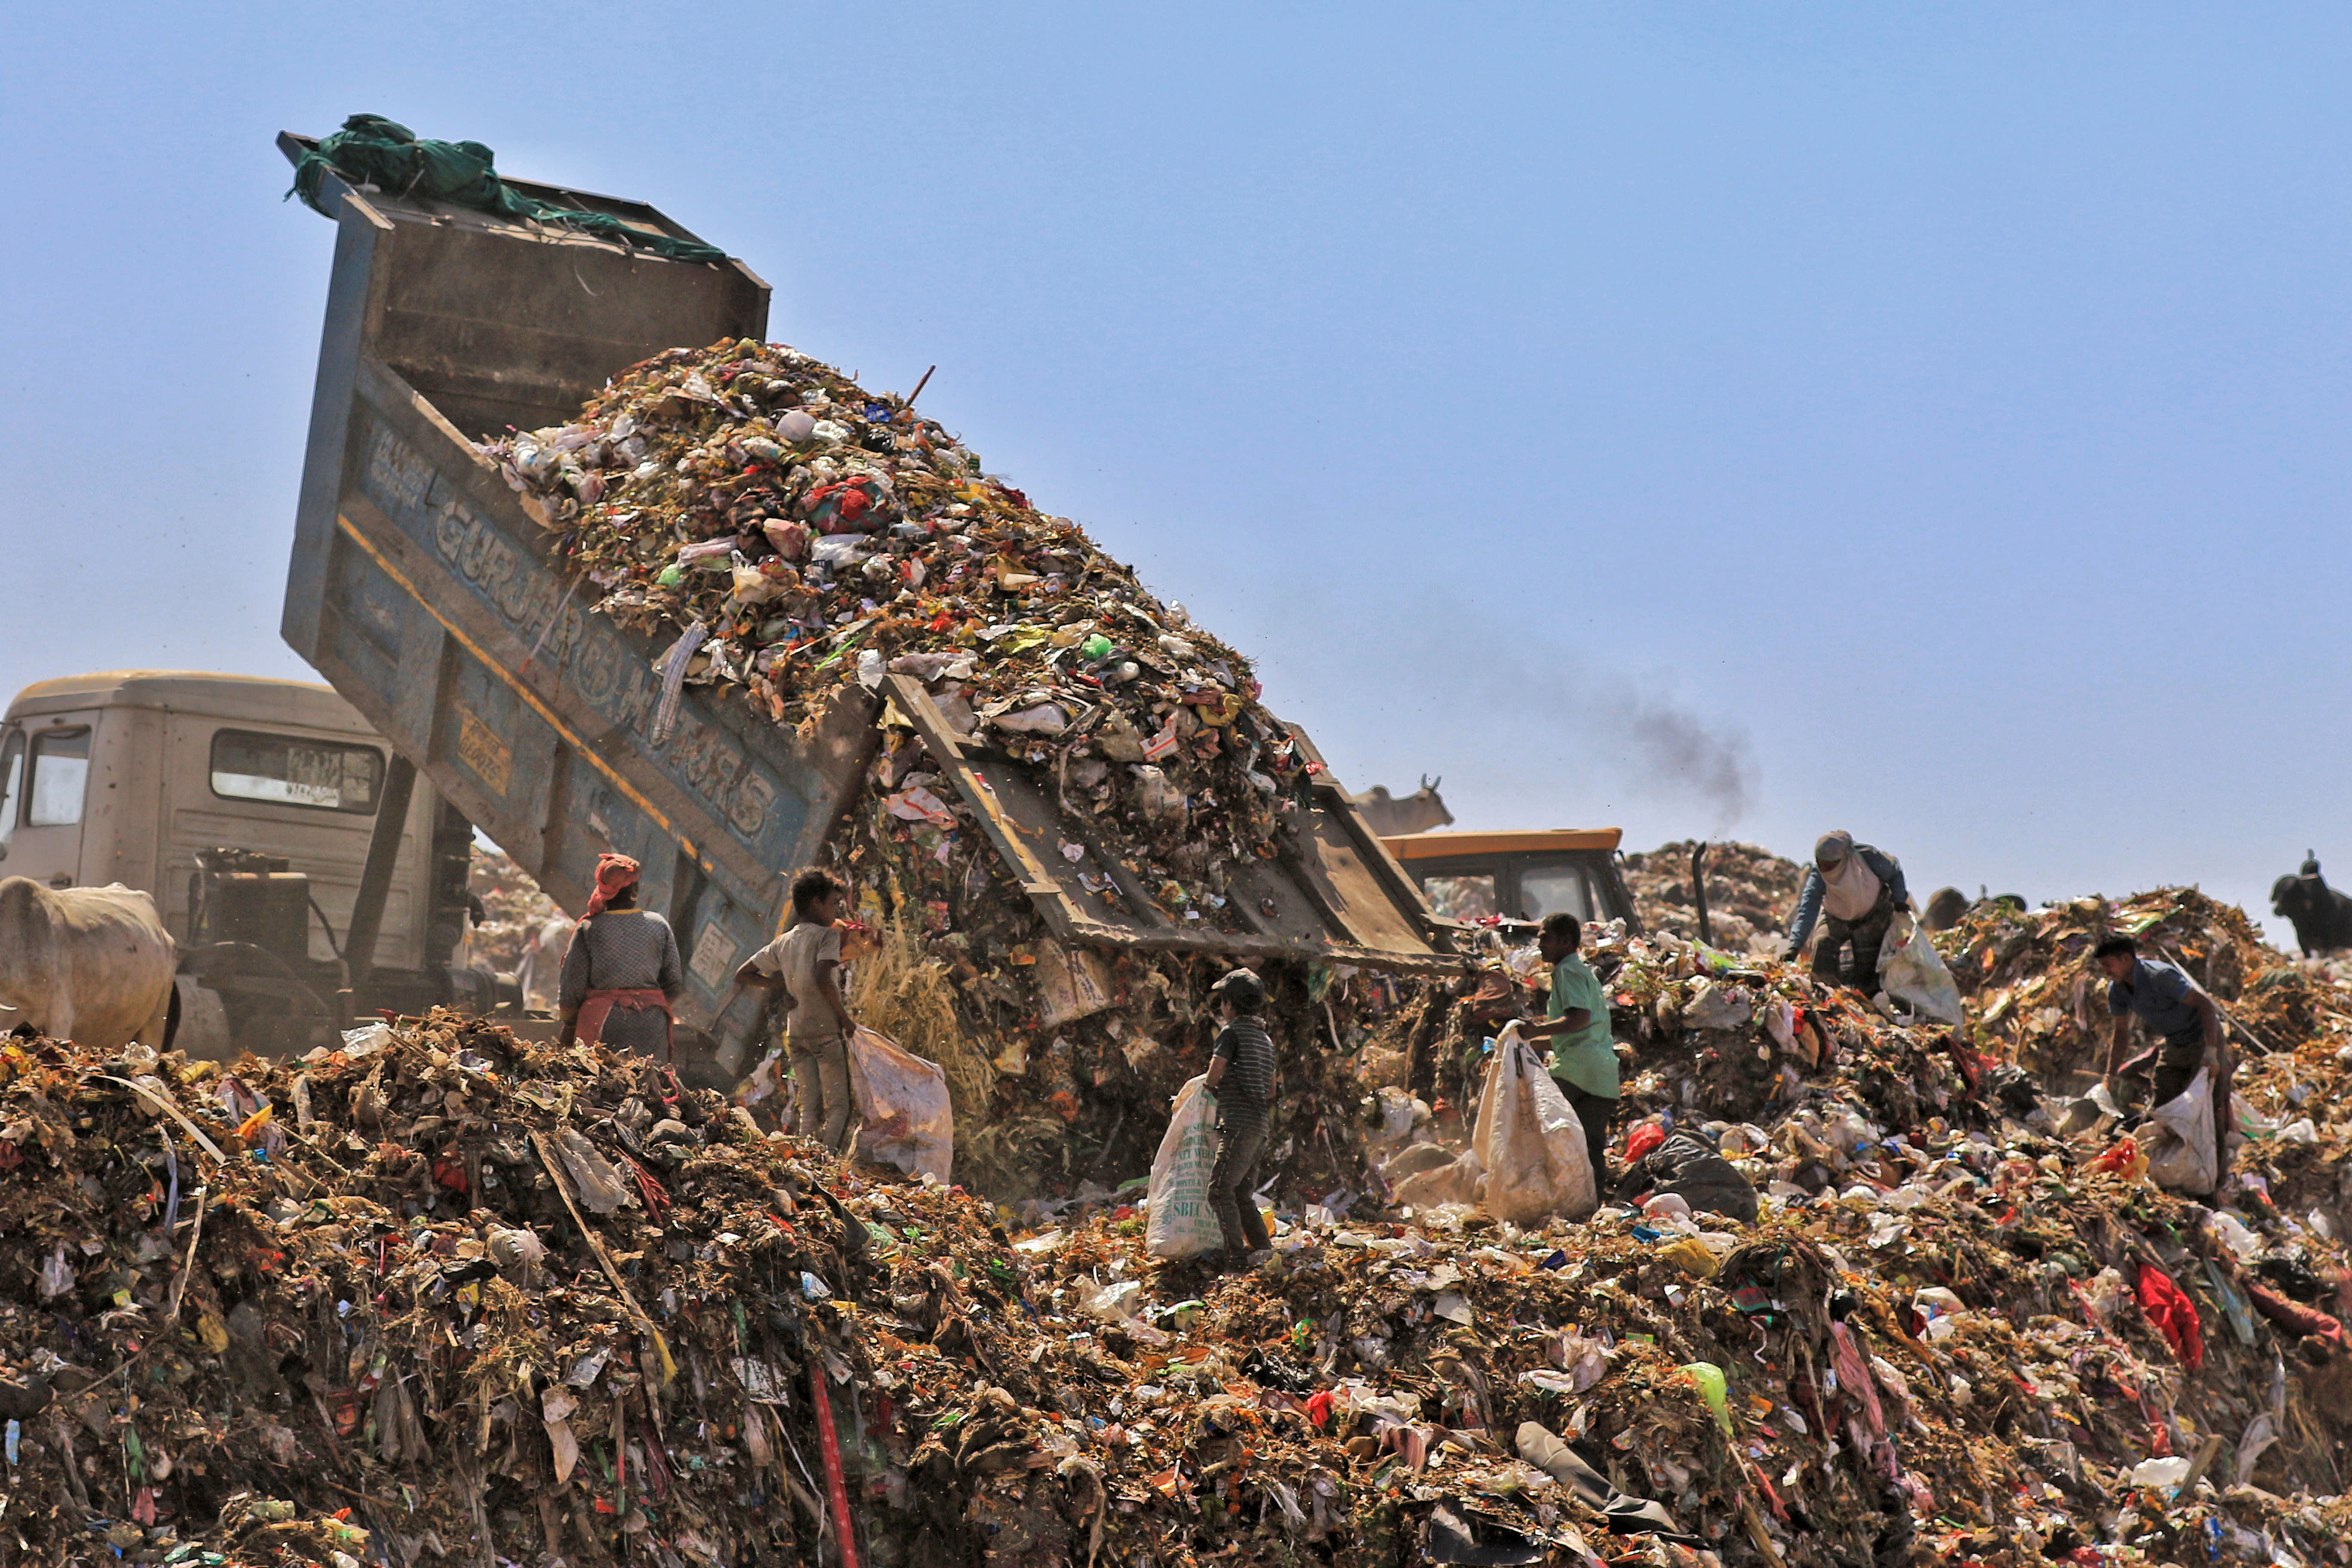 Smart waste management: how IoT limits the need for landfills